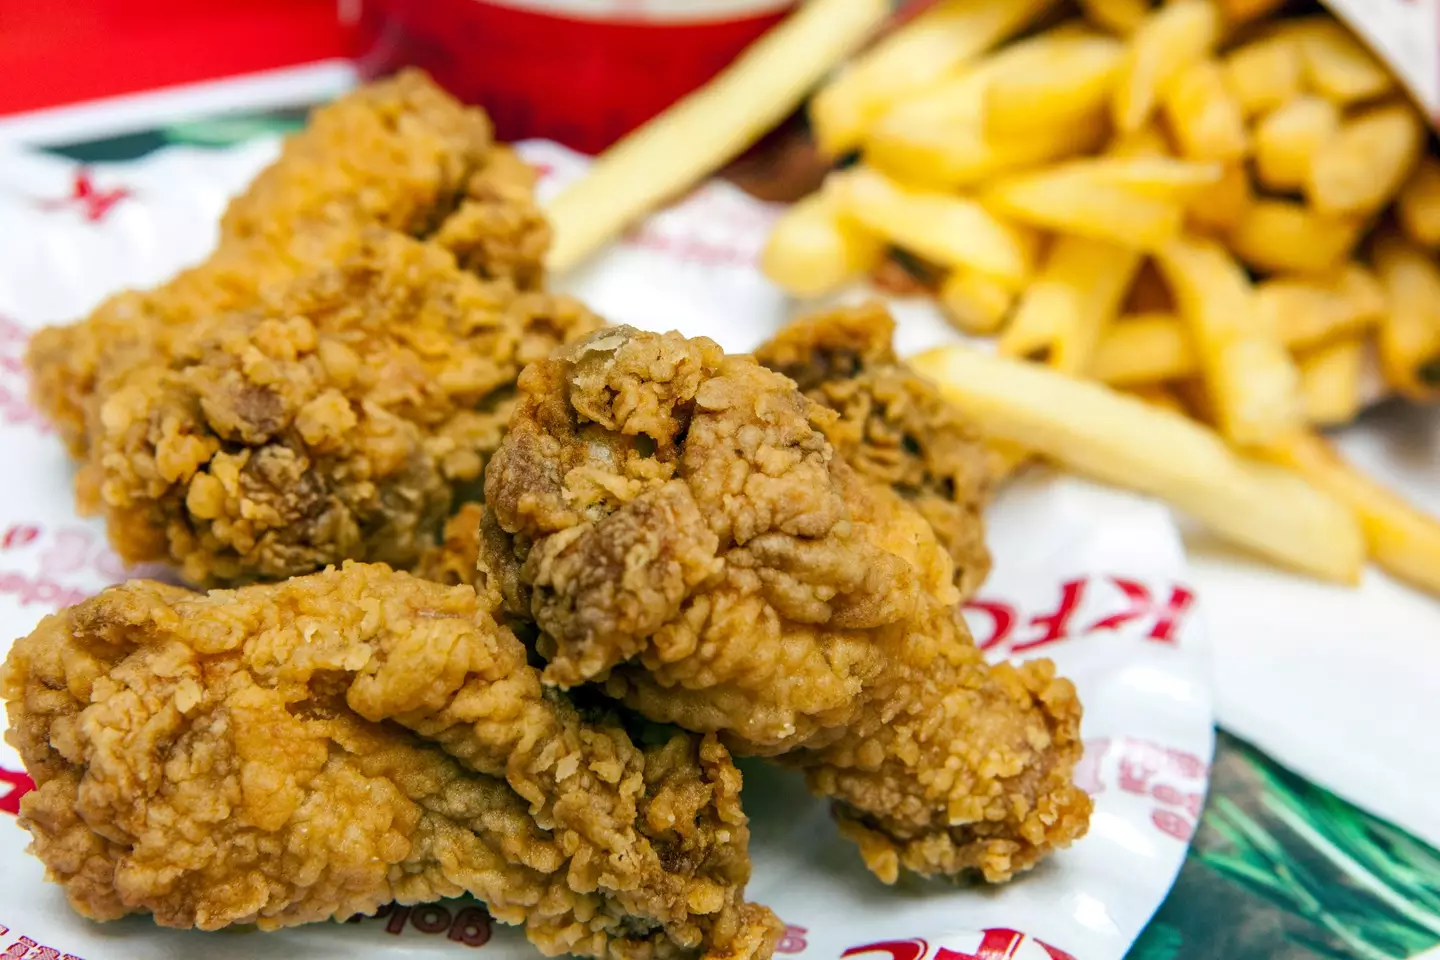 In Japan, you get 80 minutes of all-you-can-eat KFC.